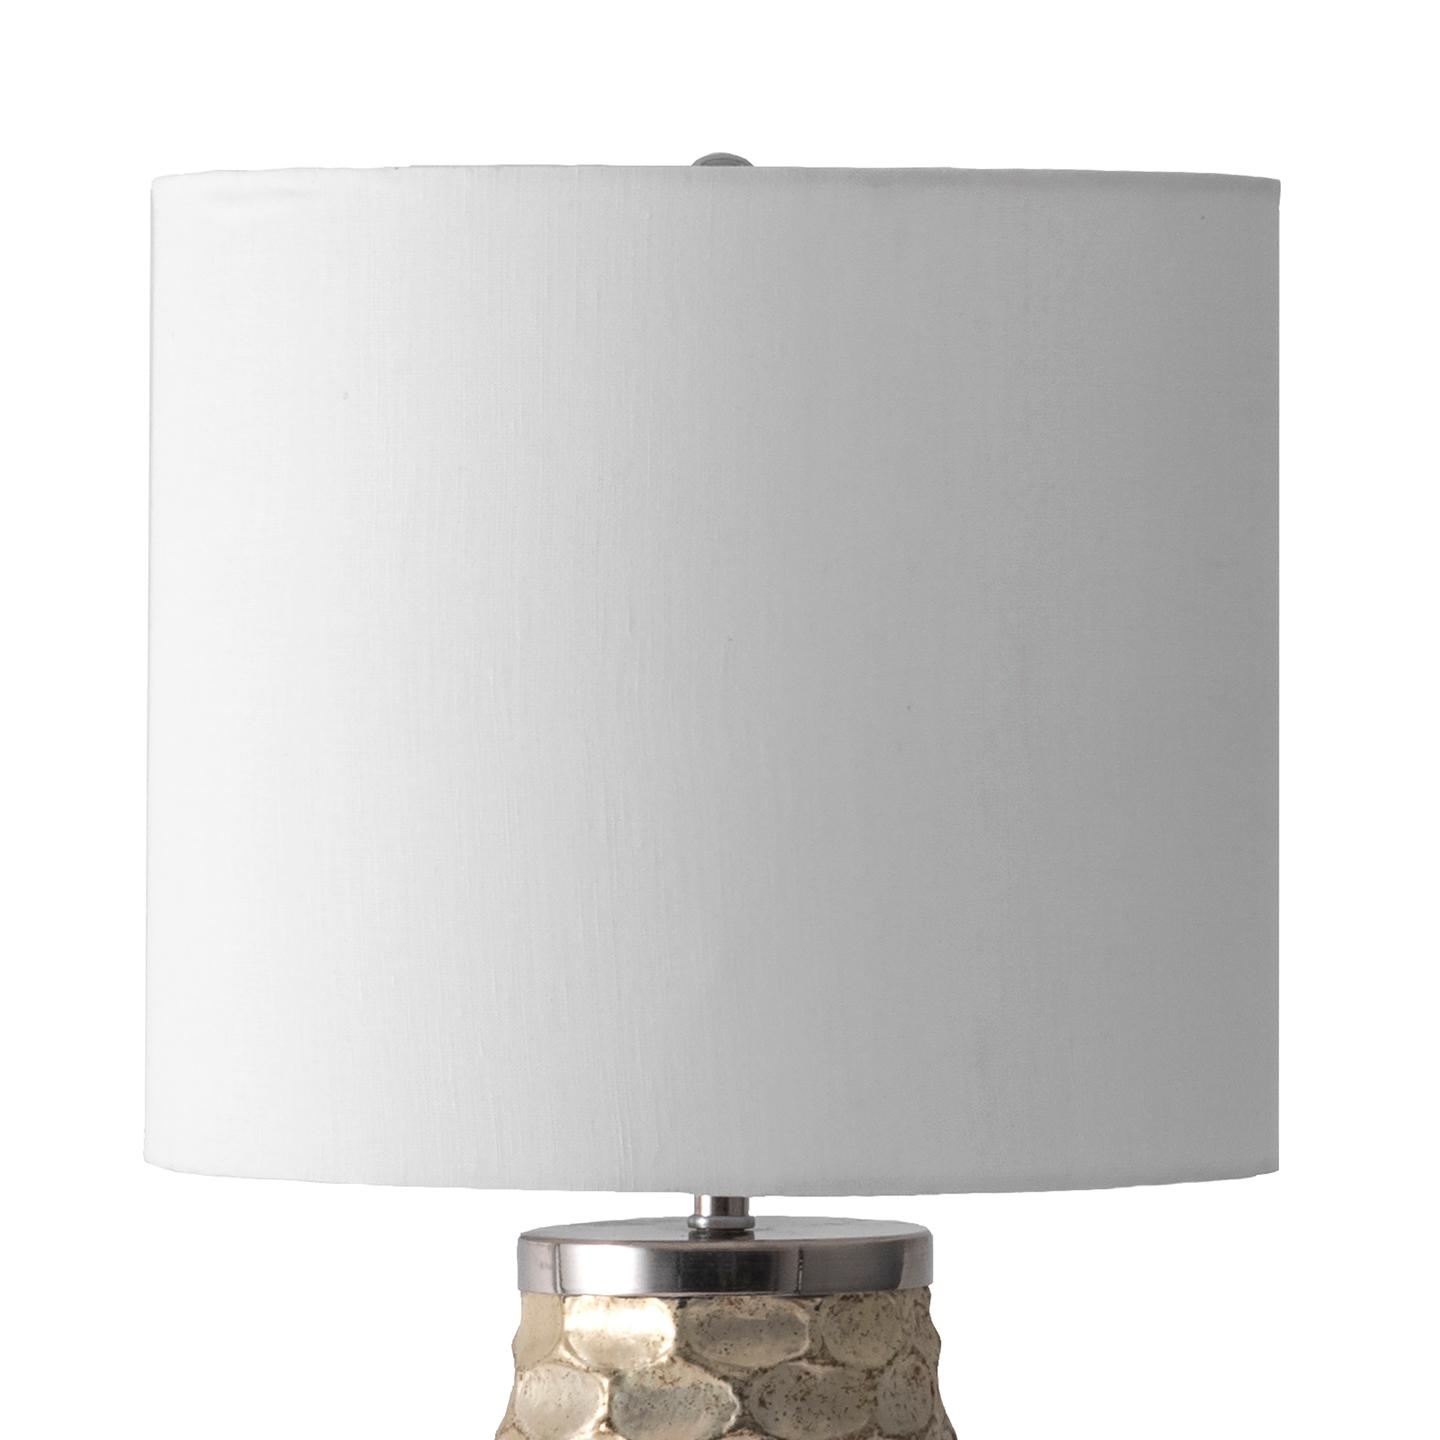 Barstow 19" Glass Table Lamp - Image 4